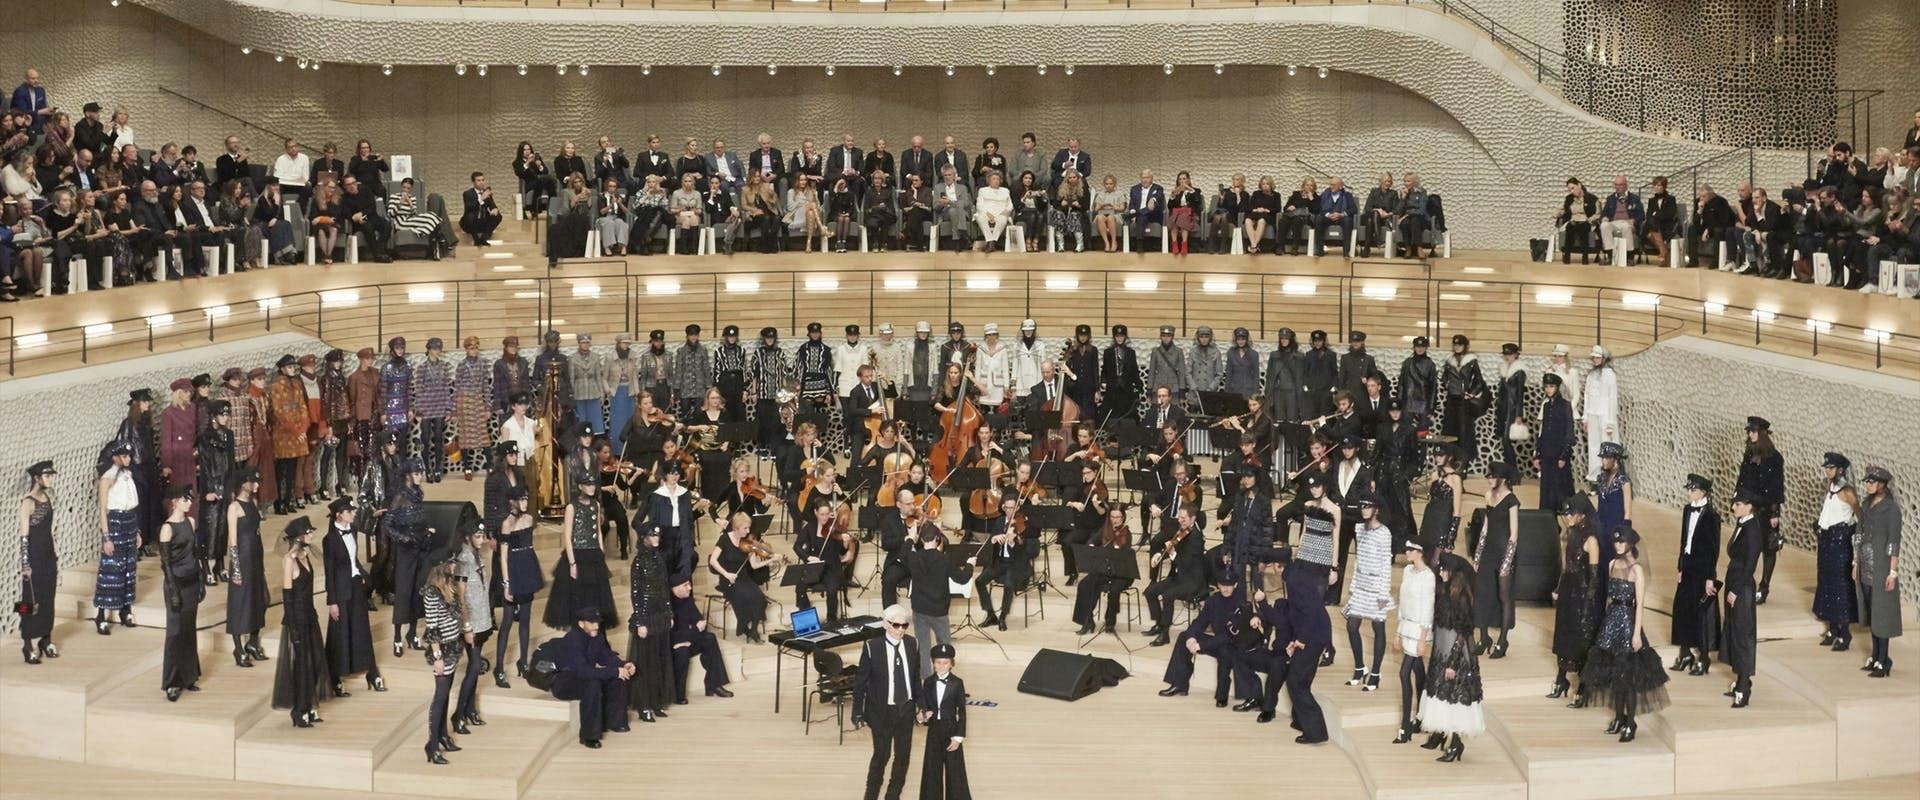 room indoors person human crowd theater orchestra concert musical instrument